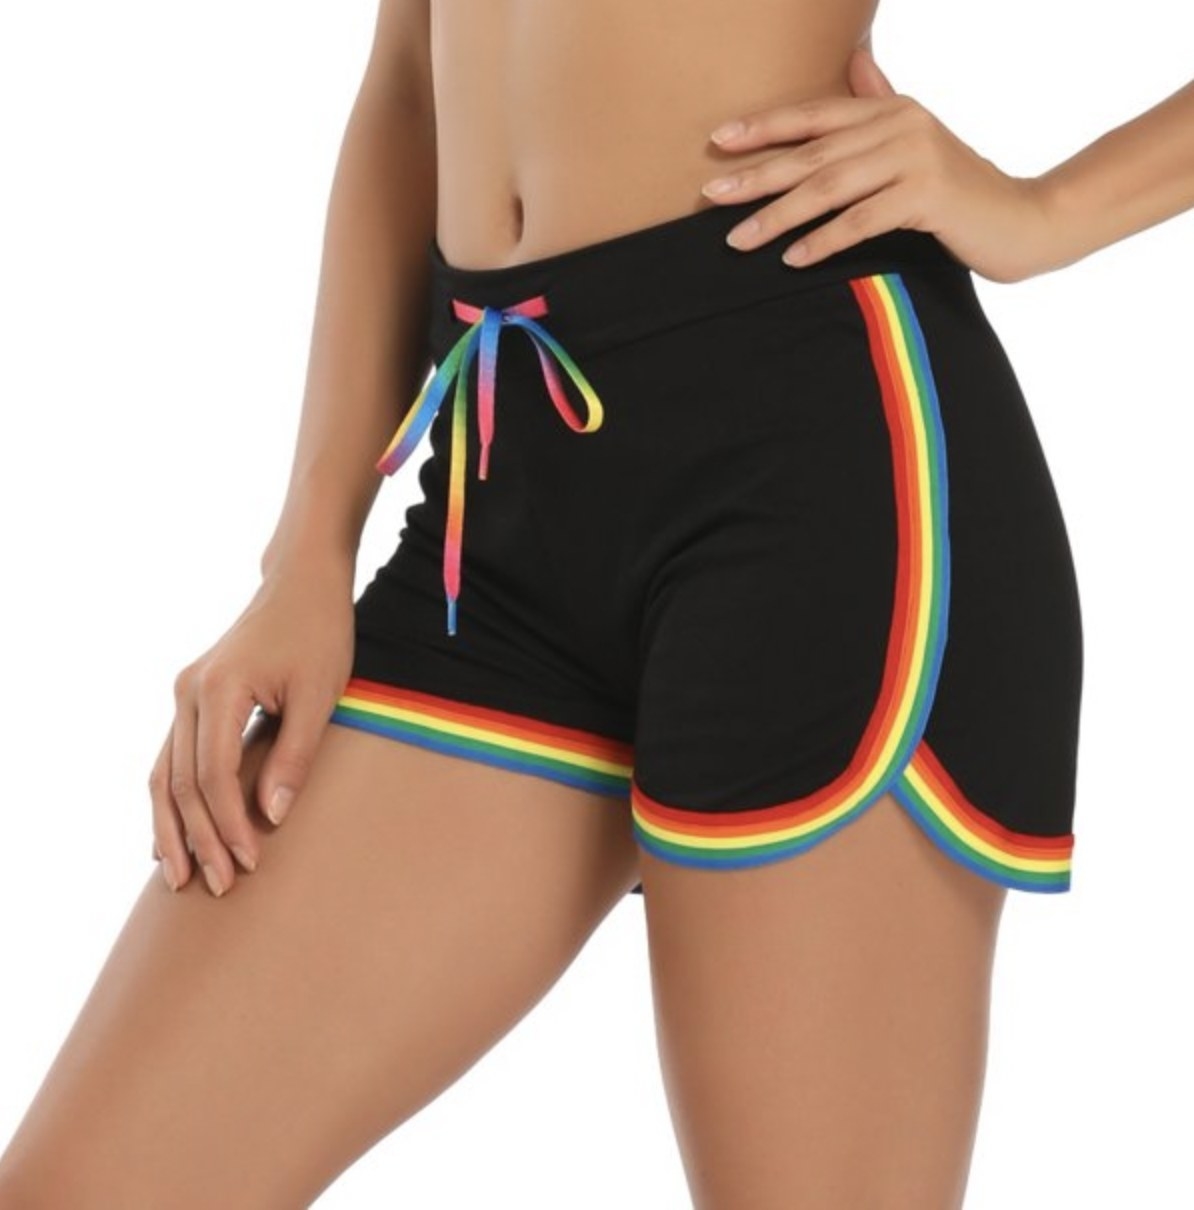 A person wearing black shorts with striped rainbow detailing at the trim